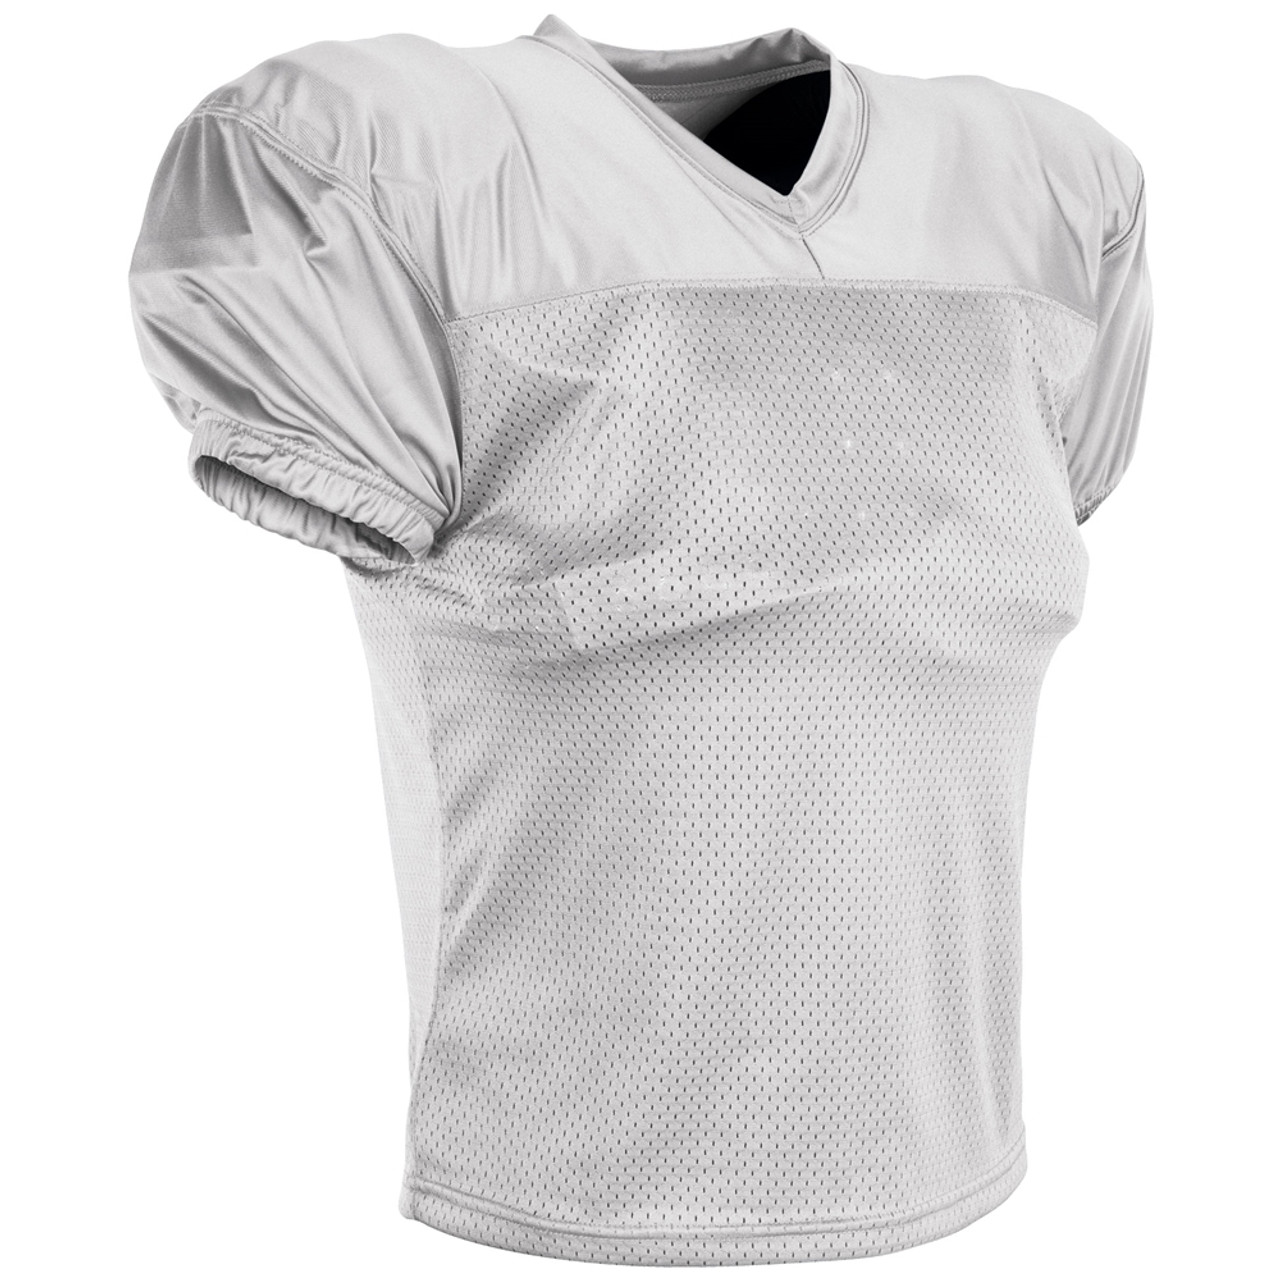 Wilson Sporting Goods Double Bar Mesh 2-Button Jersey, Adult Small, C